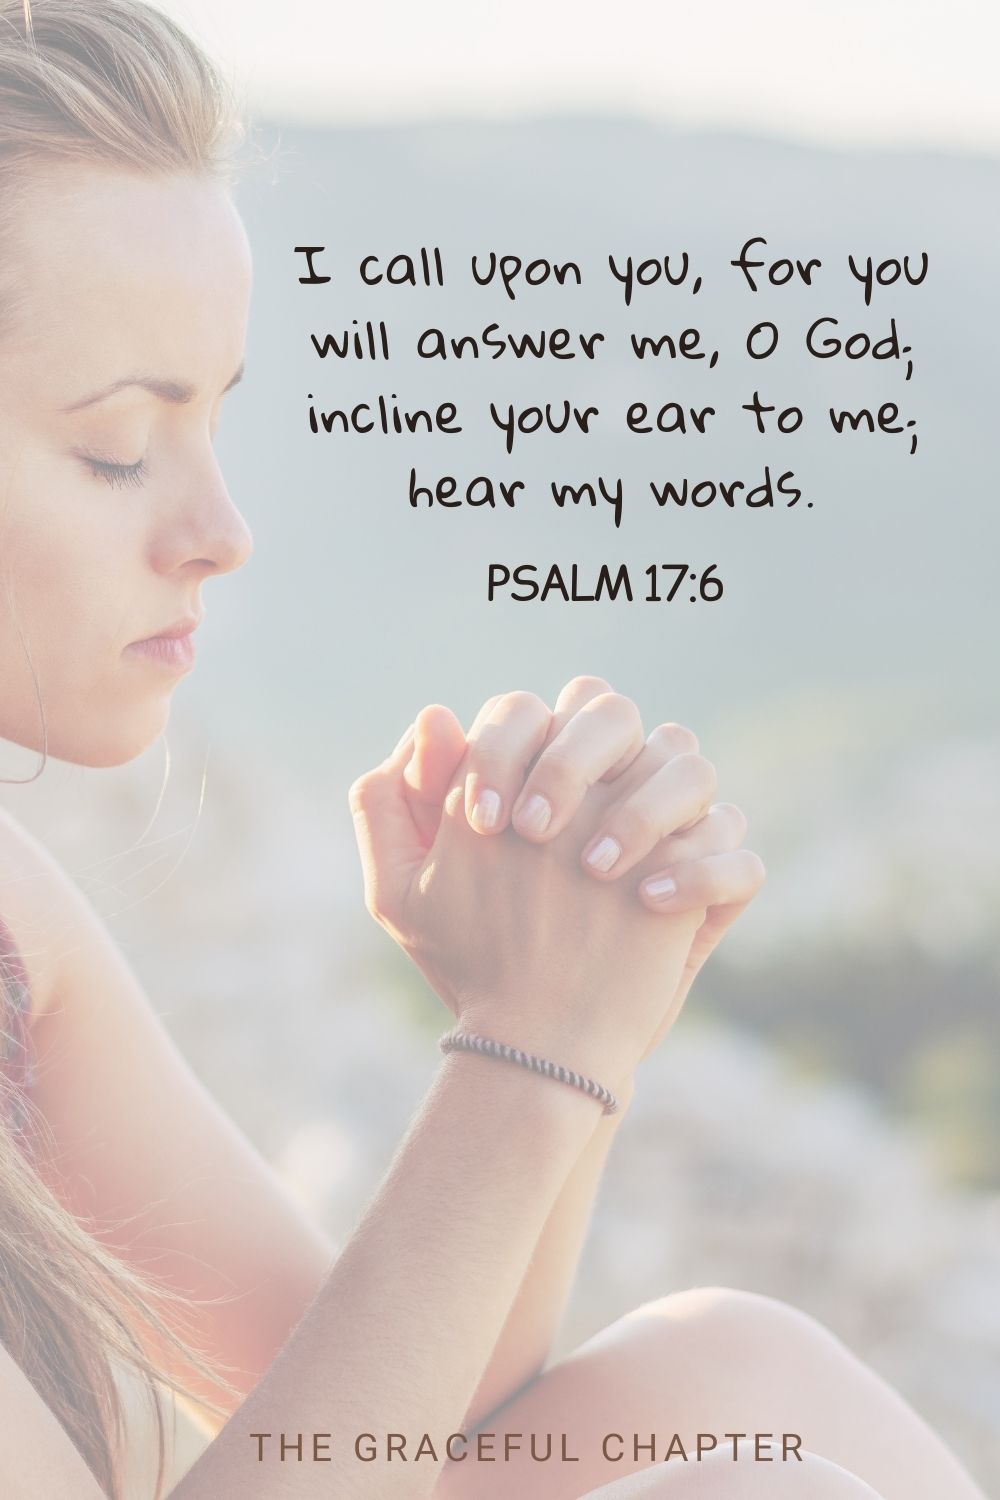 I call upon you, for you will answer me, O God; incline your ear to me; hear my words. Psalm 17:6